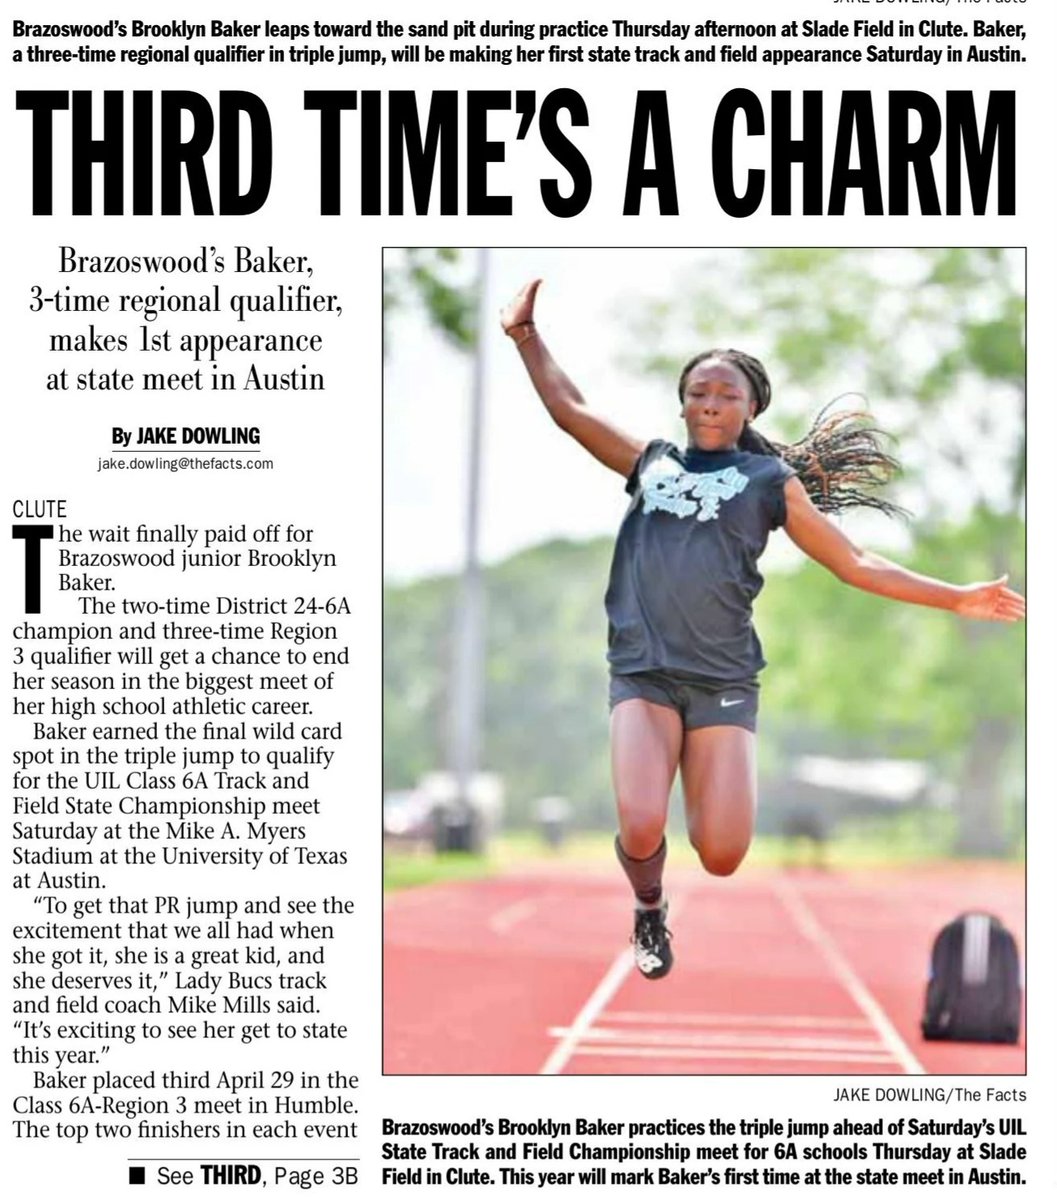 Brazoswood's Brooklyn Baker is headed to State this weekend in the Women's Triple Jump. We wish you the best, Brooklyn!
#BISDpride
#BucPride
#WhereYaFrom